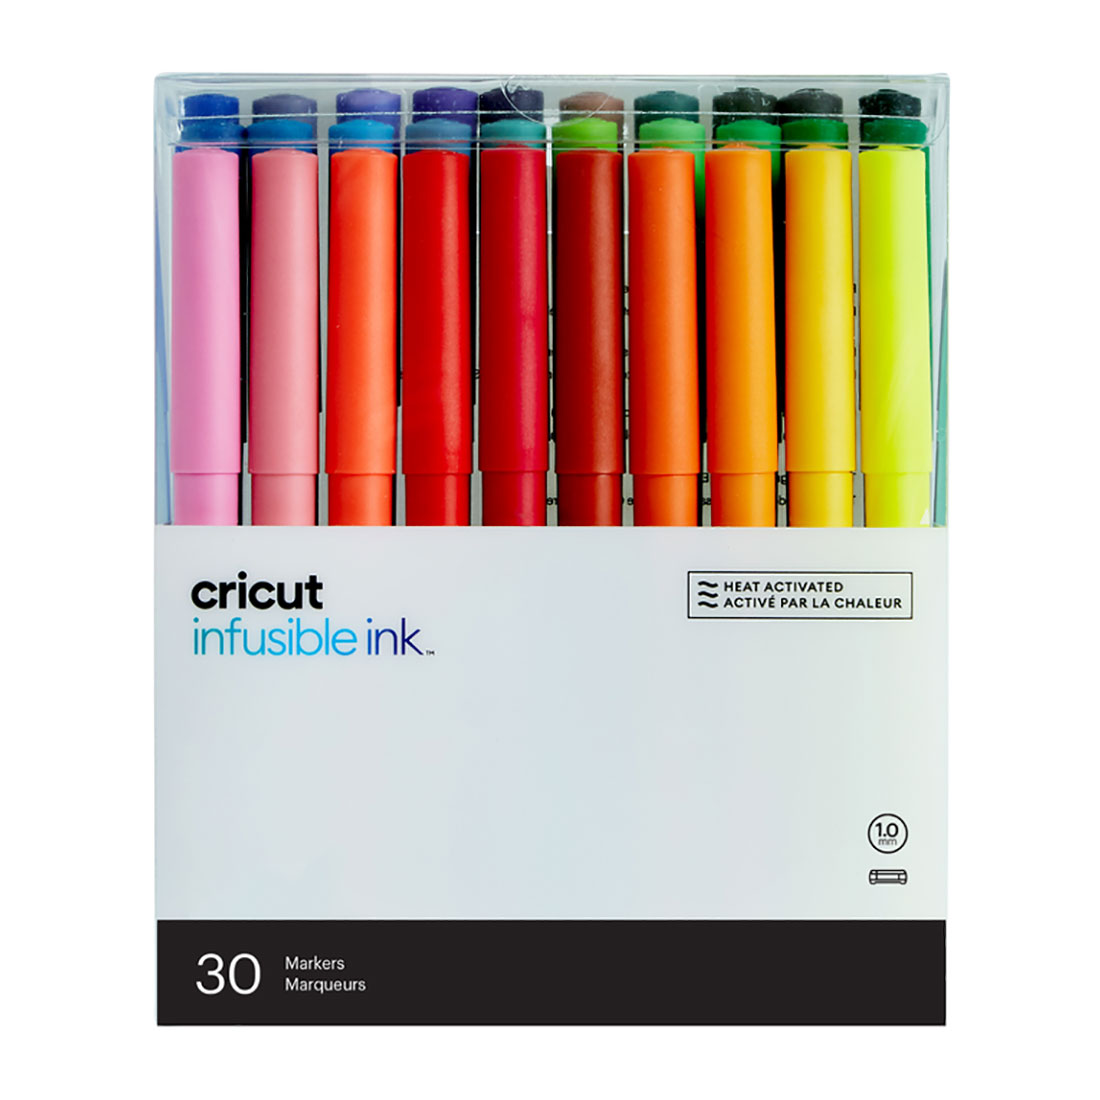 Pack of 5 Extra Fine Point Bright Pens Cricut for Maker and Explore